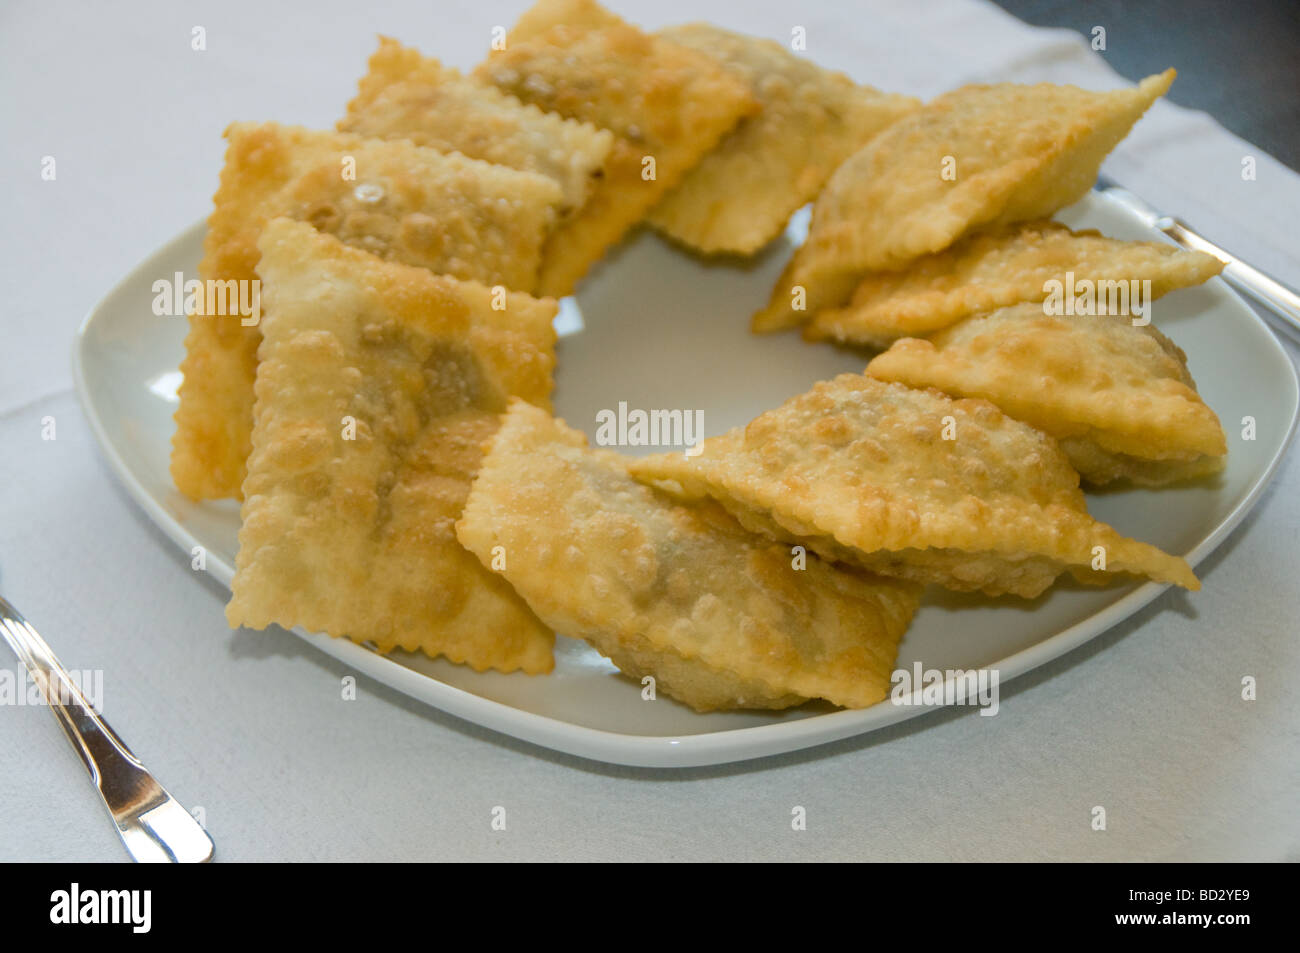 Cypriot style pastry filled with deep fried mince meat Stock Photo